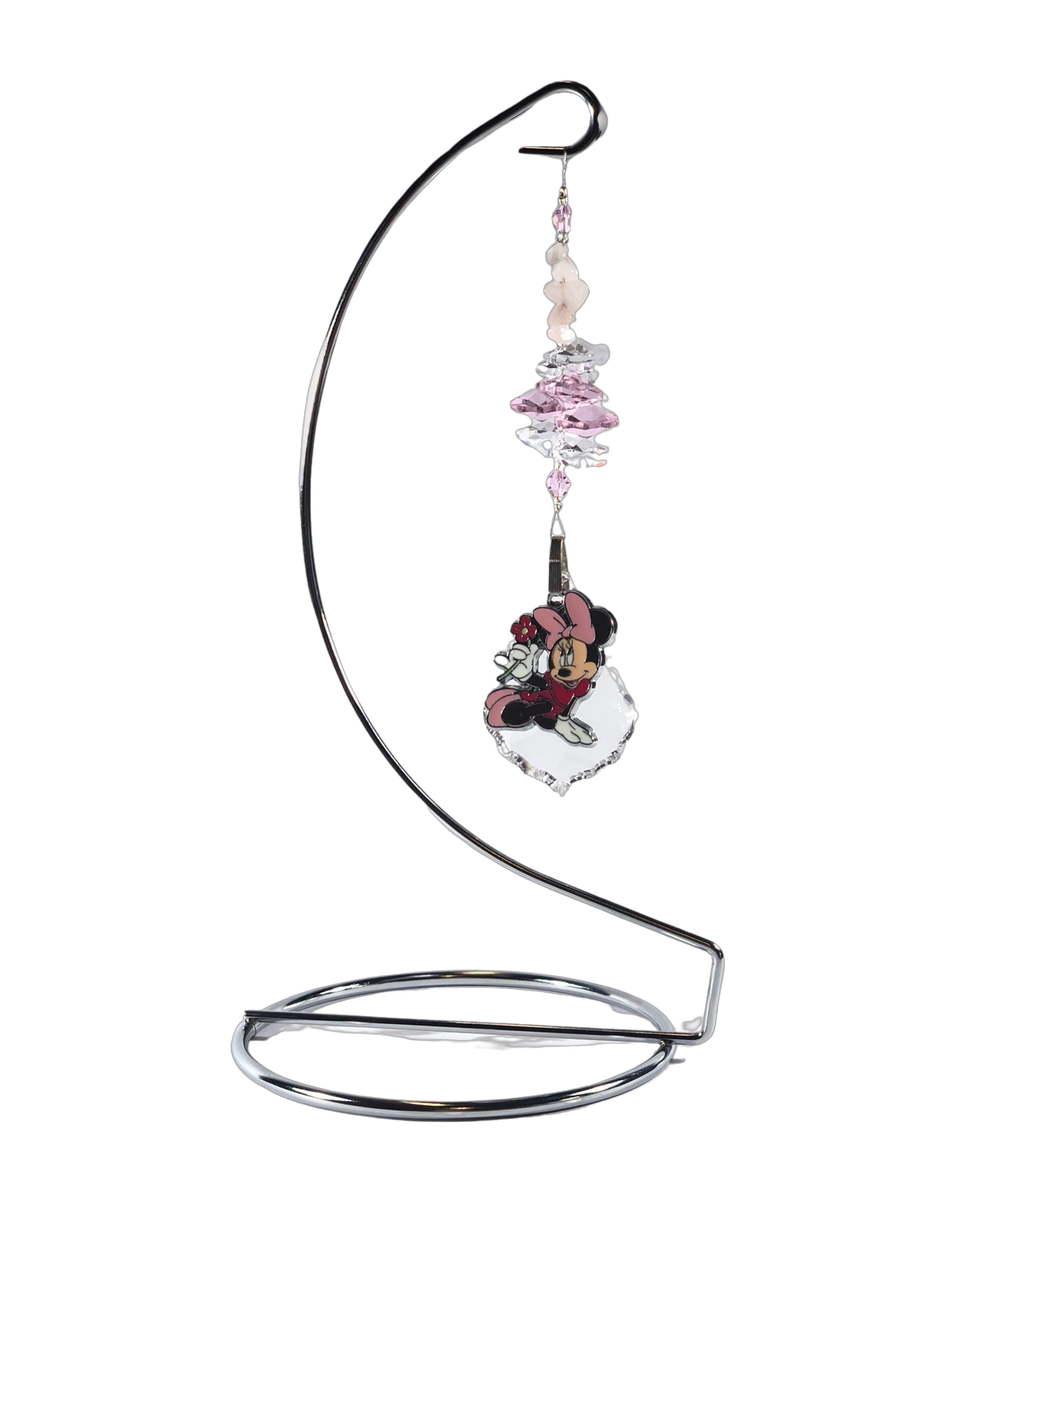 Minnie Mouse - Disney crystal suncatcher is decorated with rose quartz gemstones and come on this amazing stand.